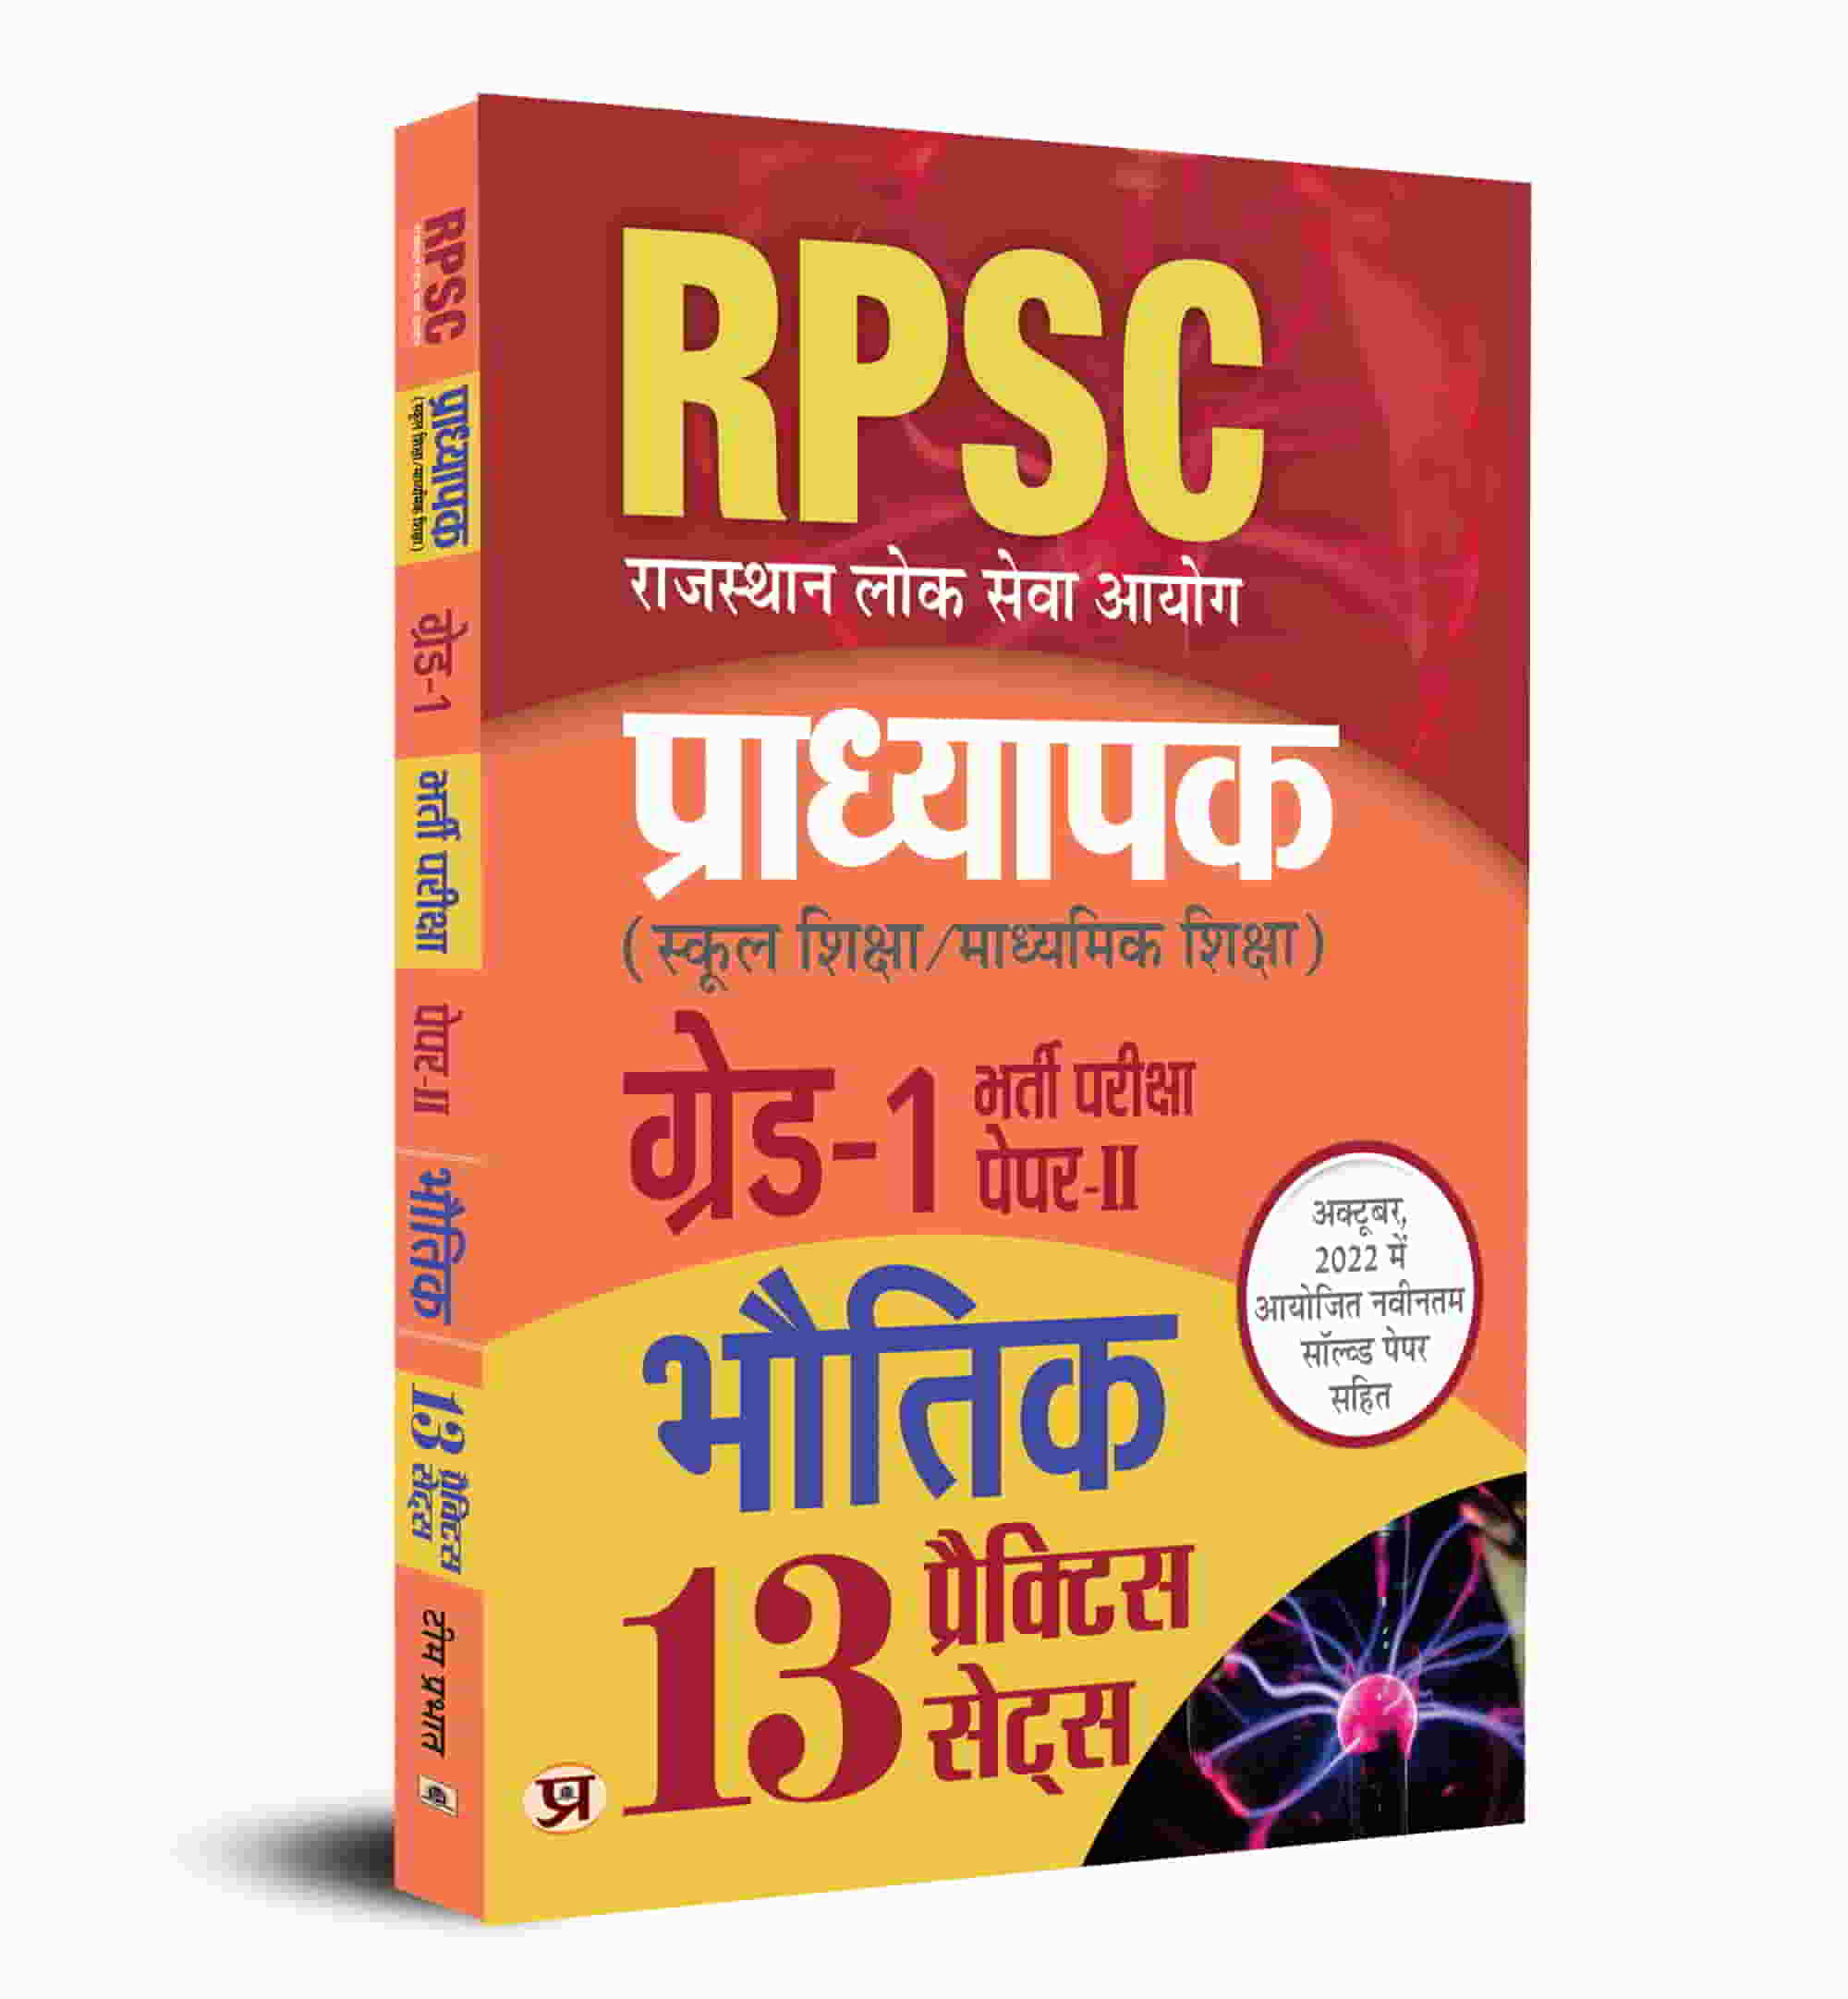 RPSC Subject Physical Education Professor School Education / Secondary Education Recruitment Exam (PAPER-II ) Grade - 1 14 Practice Sets In Hindi